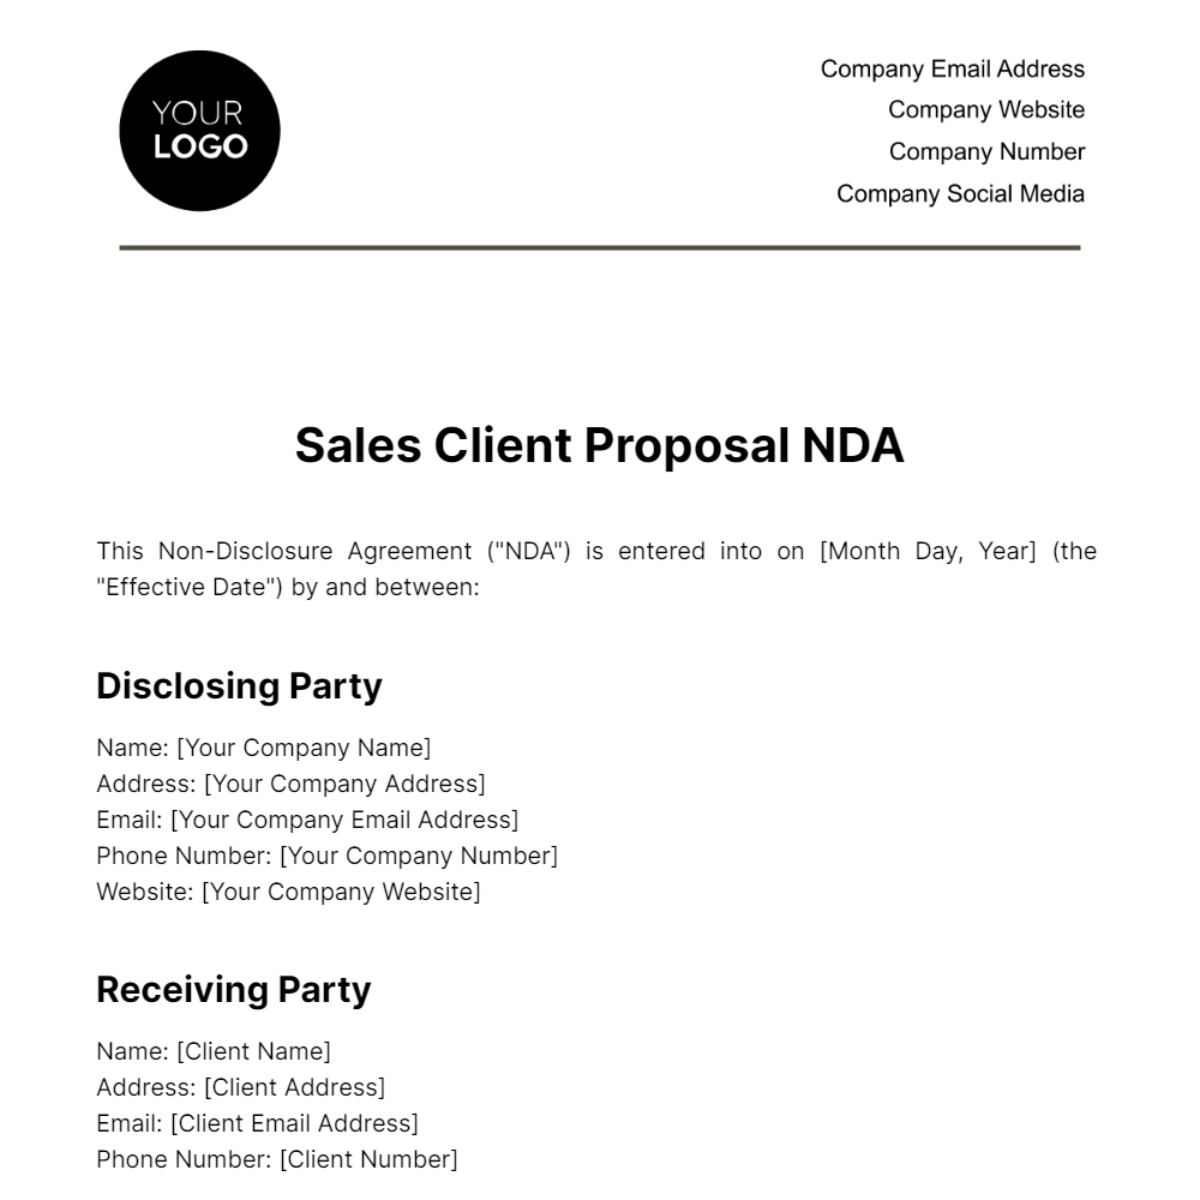 Free Sales Client Proposal NDA Template